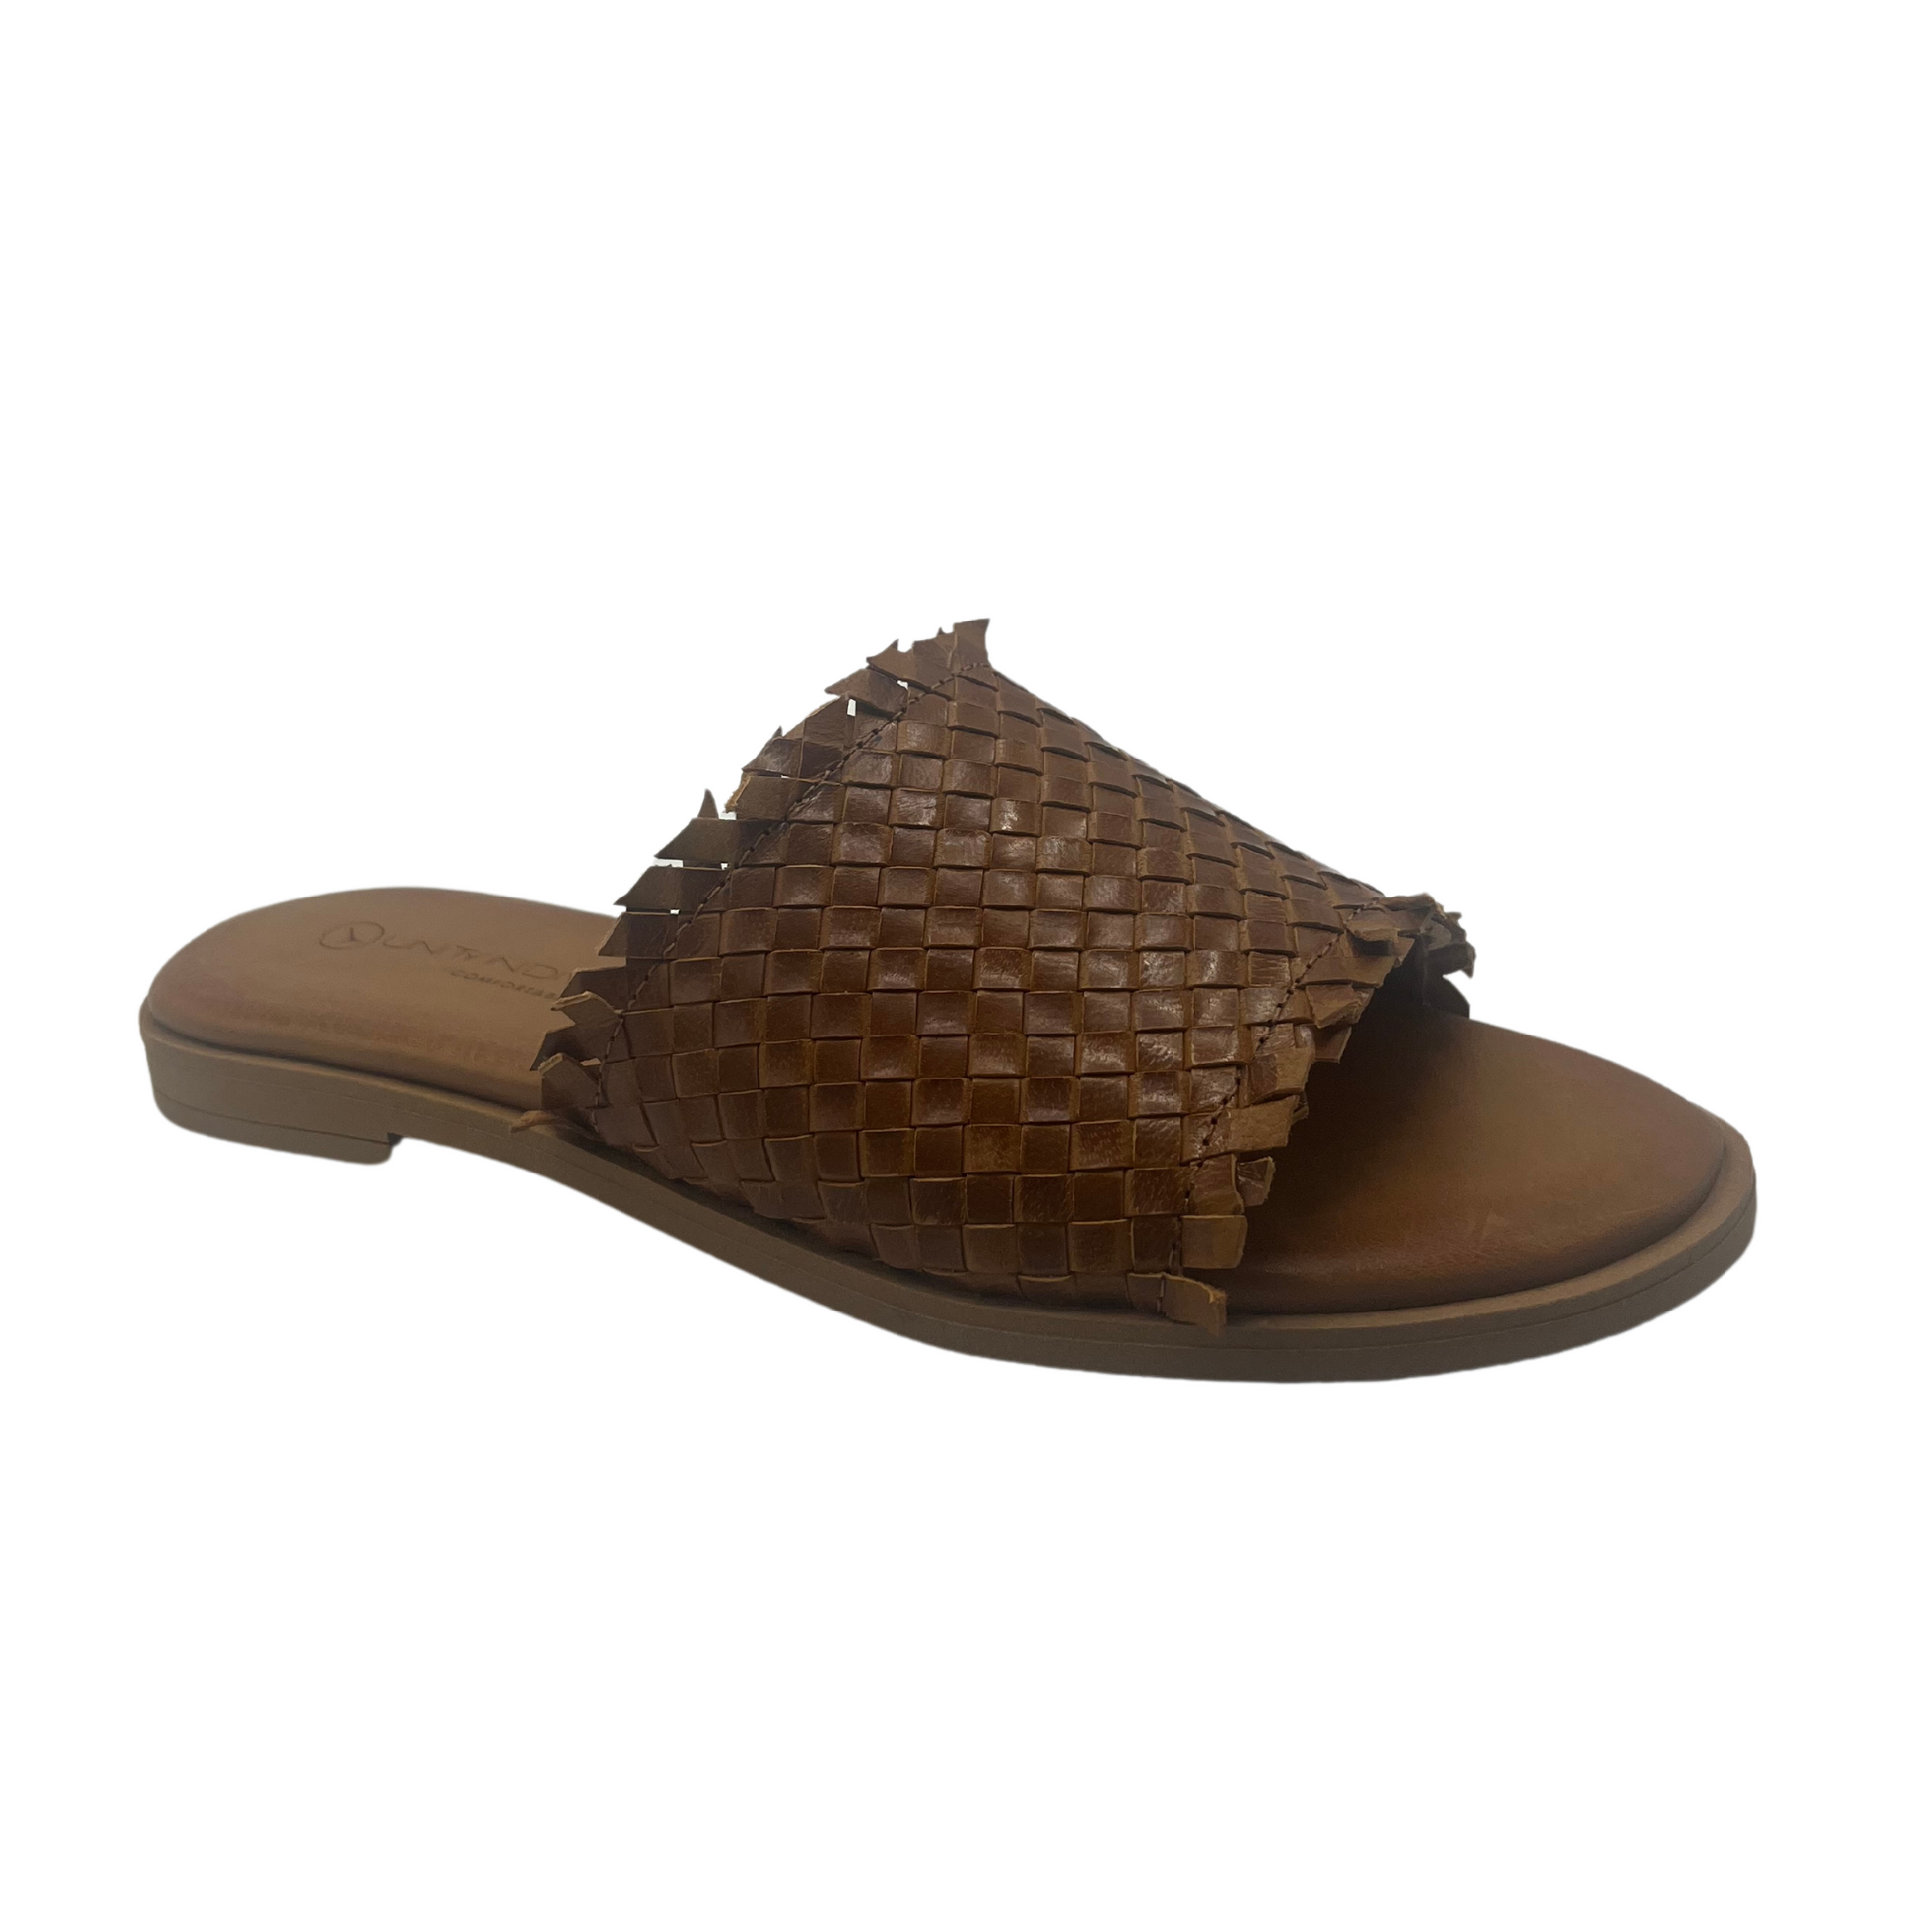 Angled view of brown woven leather slip on sandal with brown footbed